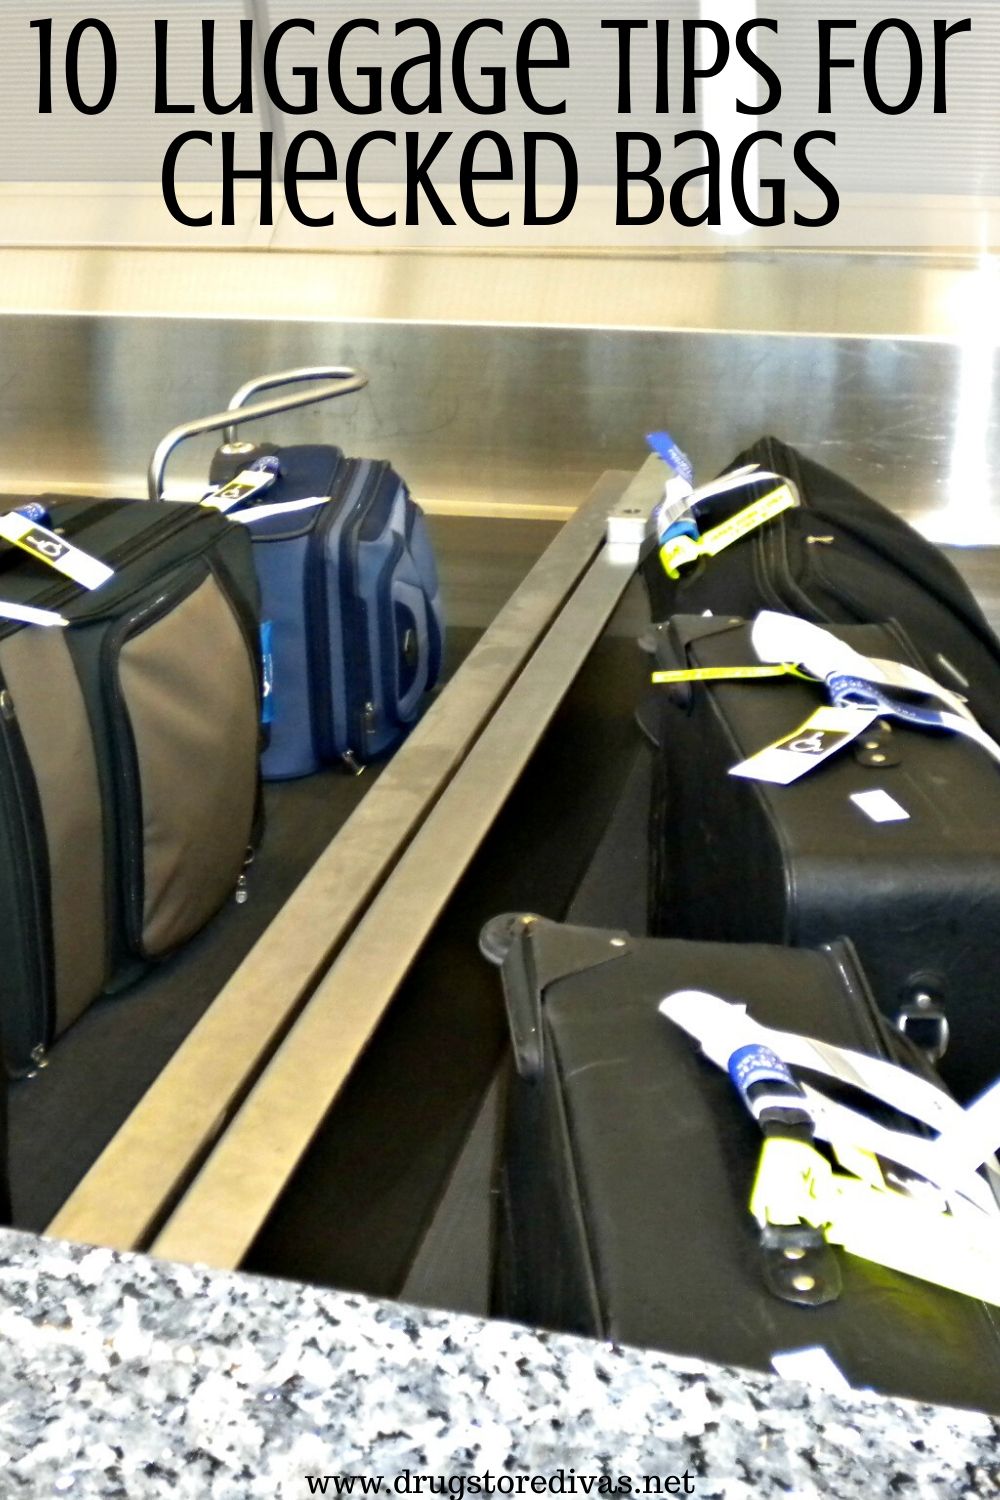 Before you start packing for your next trip, check out these 10 Luggage Tips For Checked Bags from www.drugstoredivas.net.